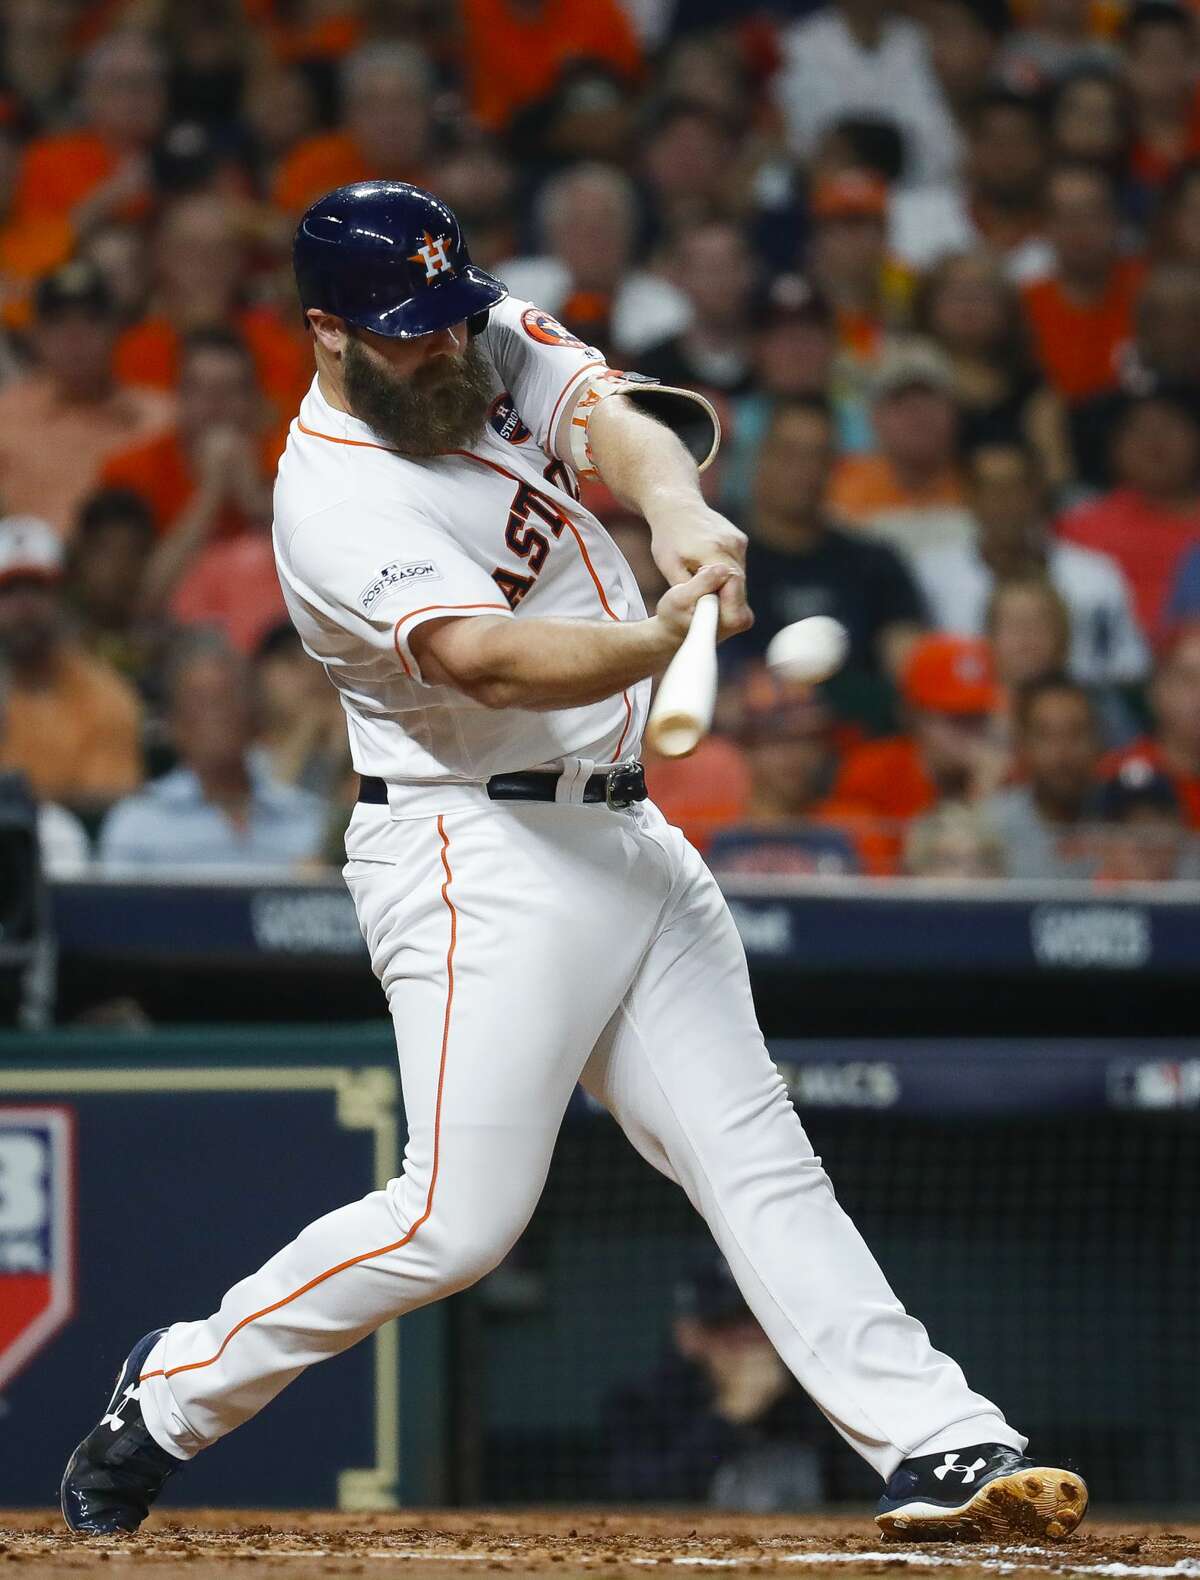 Evan Gattis Goes From Janitor To World Series Champ. 